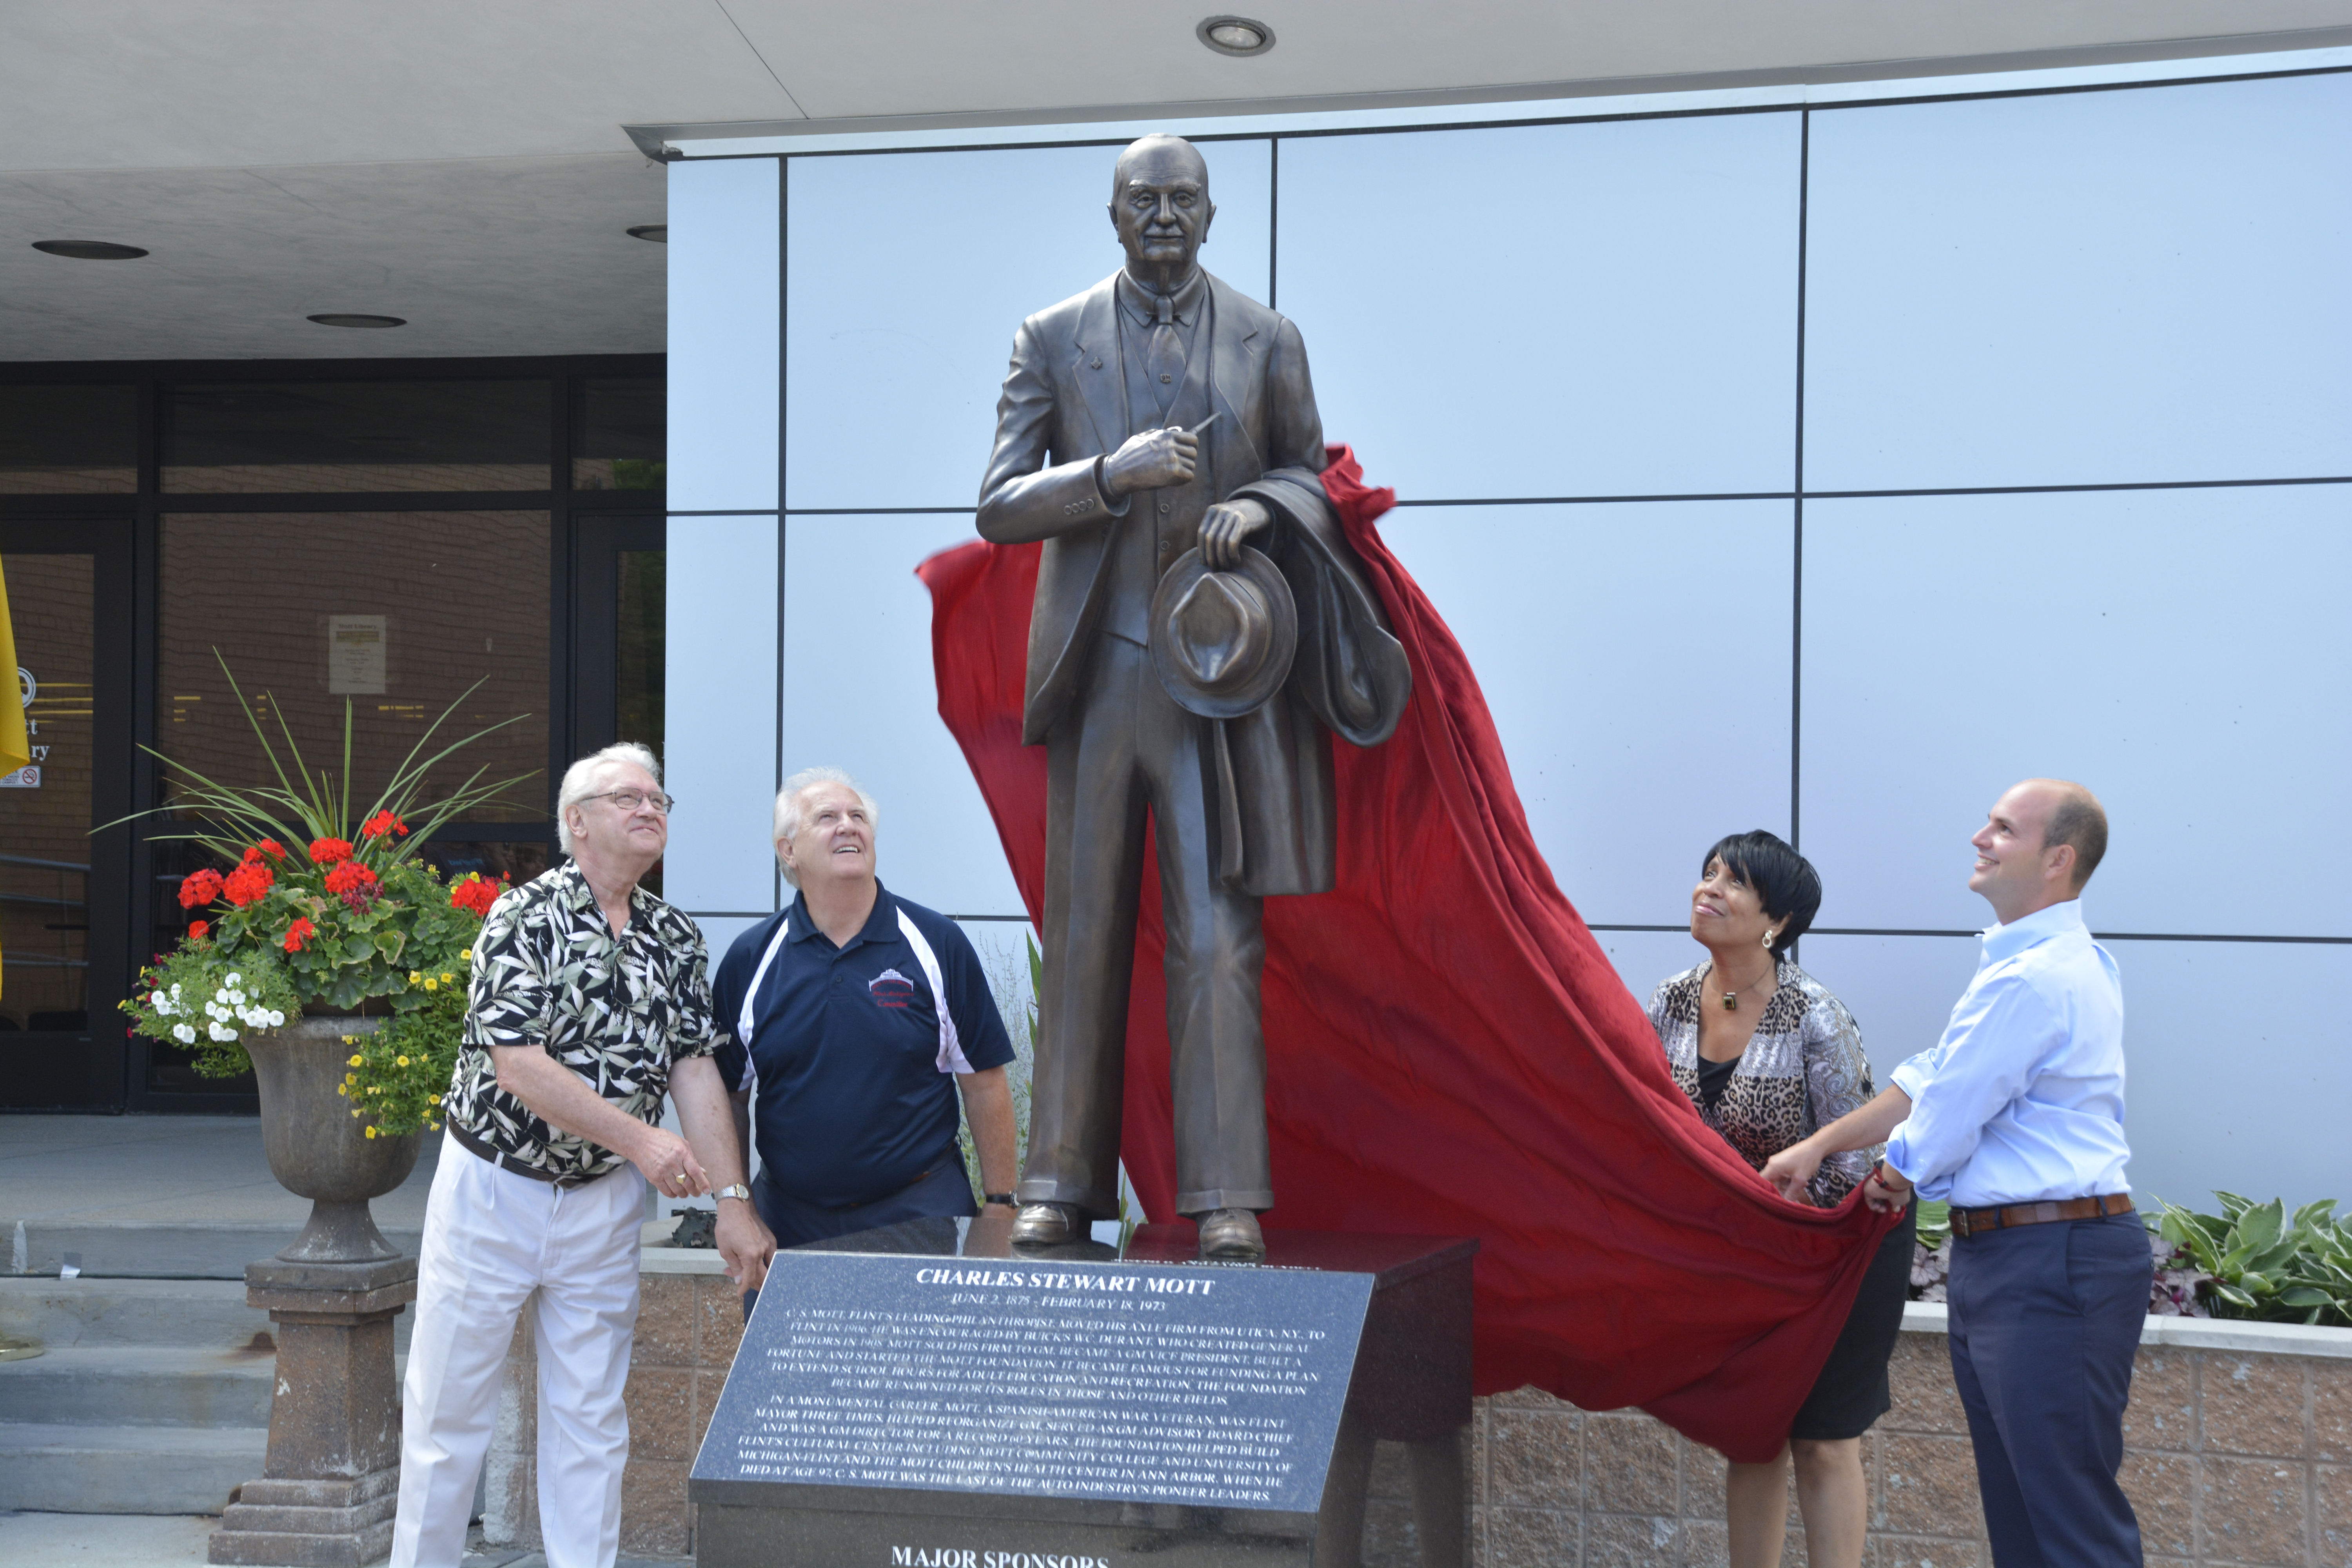 L-R: Joe Rundell (Sculptor), Al Hatch (Back to the Bricks Chair), Dr Beverly Walker-Griffea (MCC President), and Ridgway White (C. S. Mott Foundation President). Not seen but participating in this photo is Dr. Karen Williams Weaver (City of Flint Mayor).